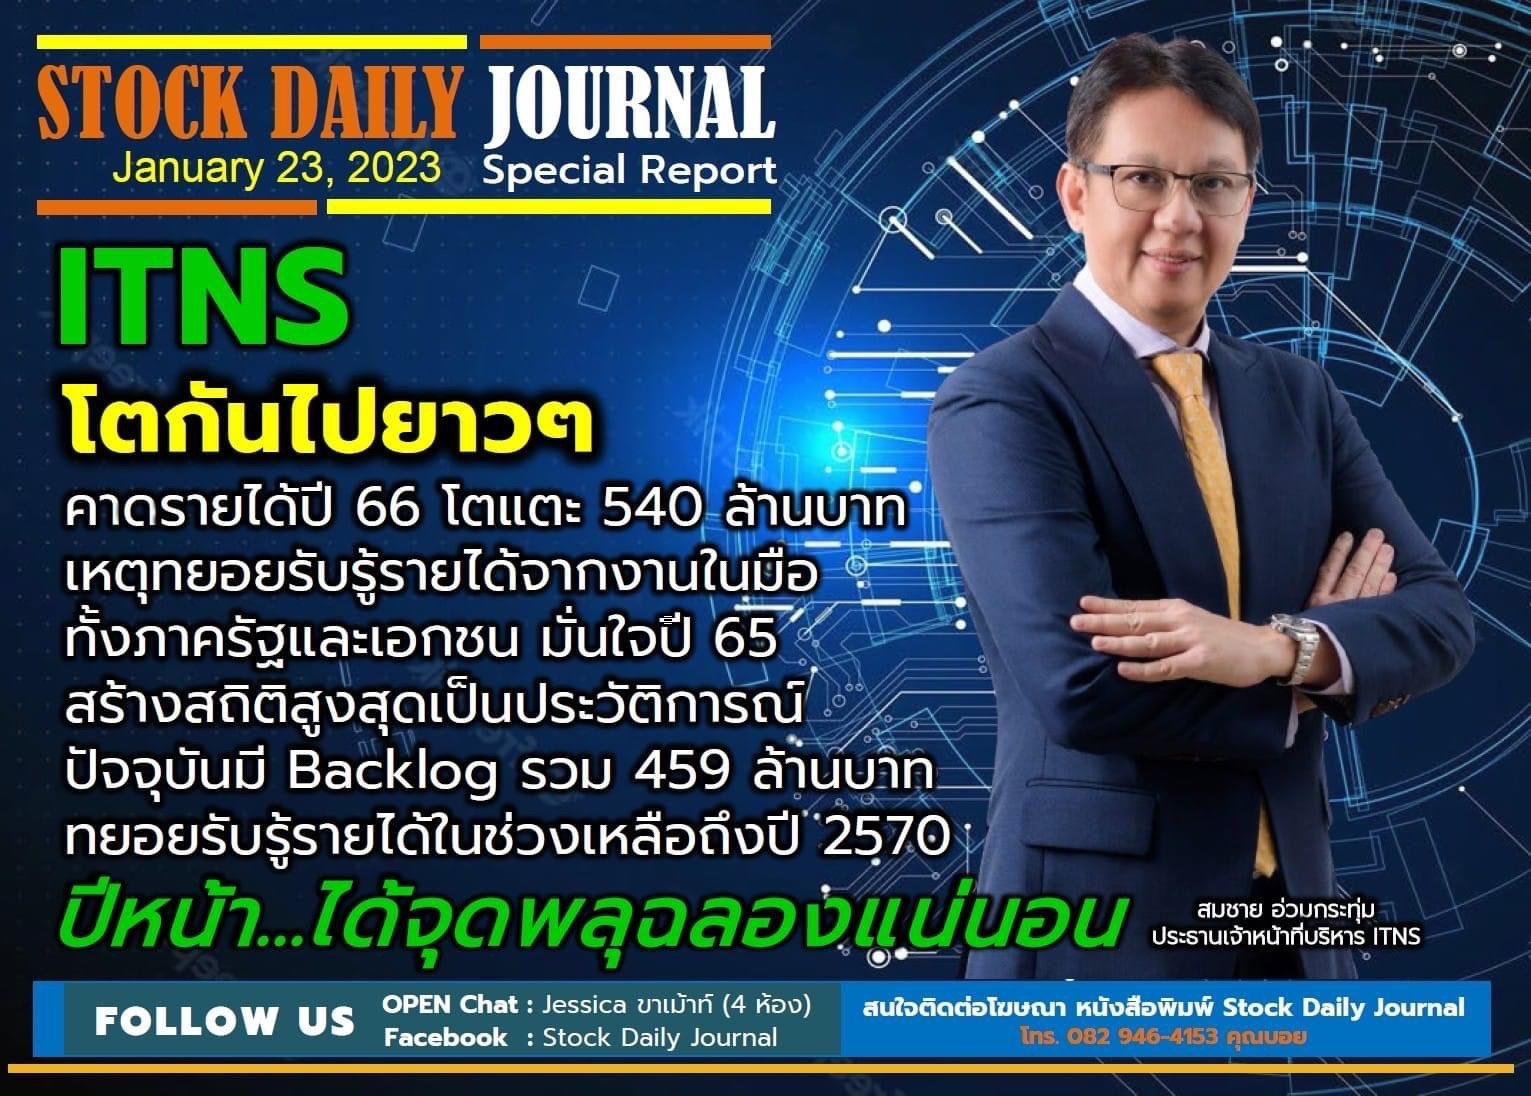 STOCK DAILY JOURNAL “Special Report : ITNS”